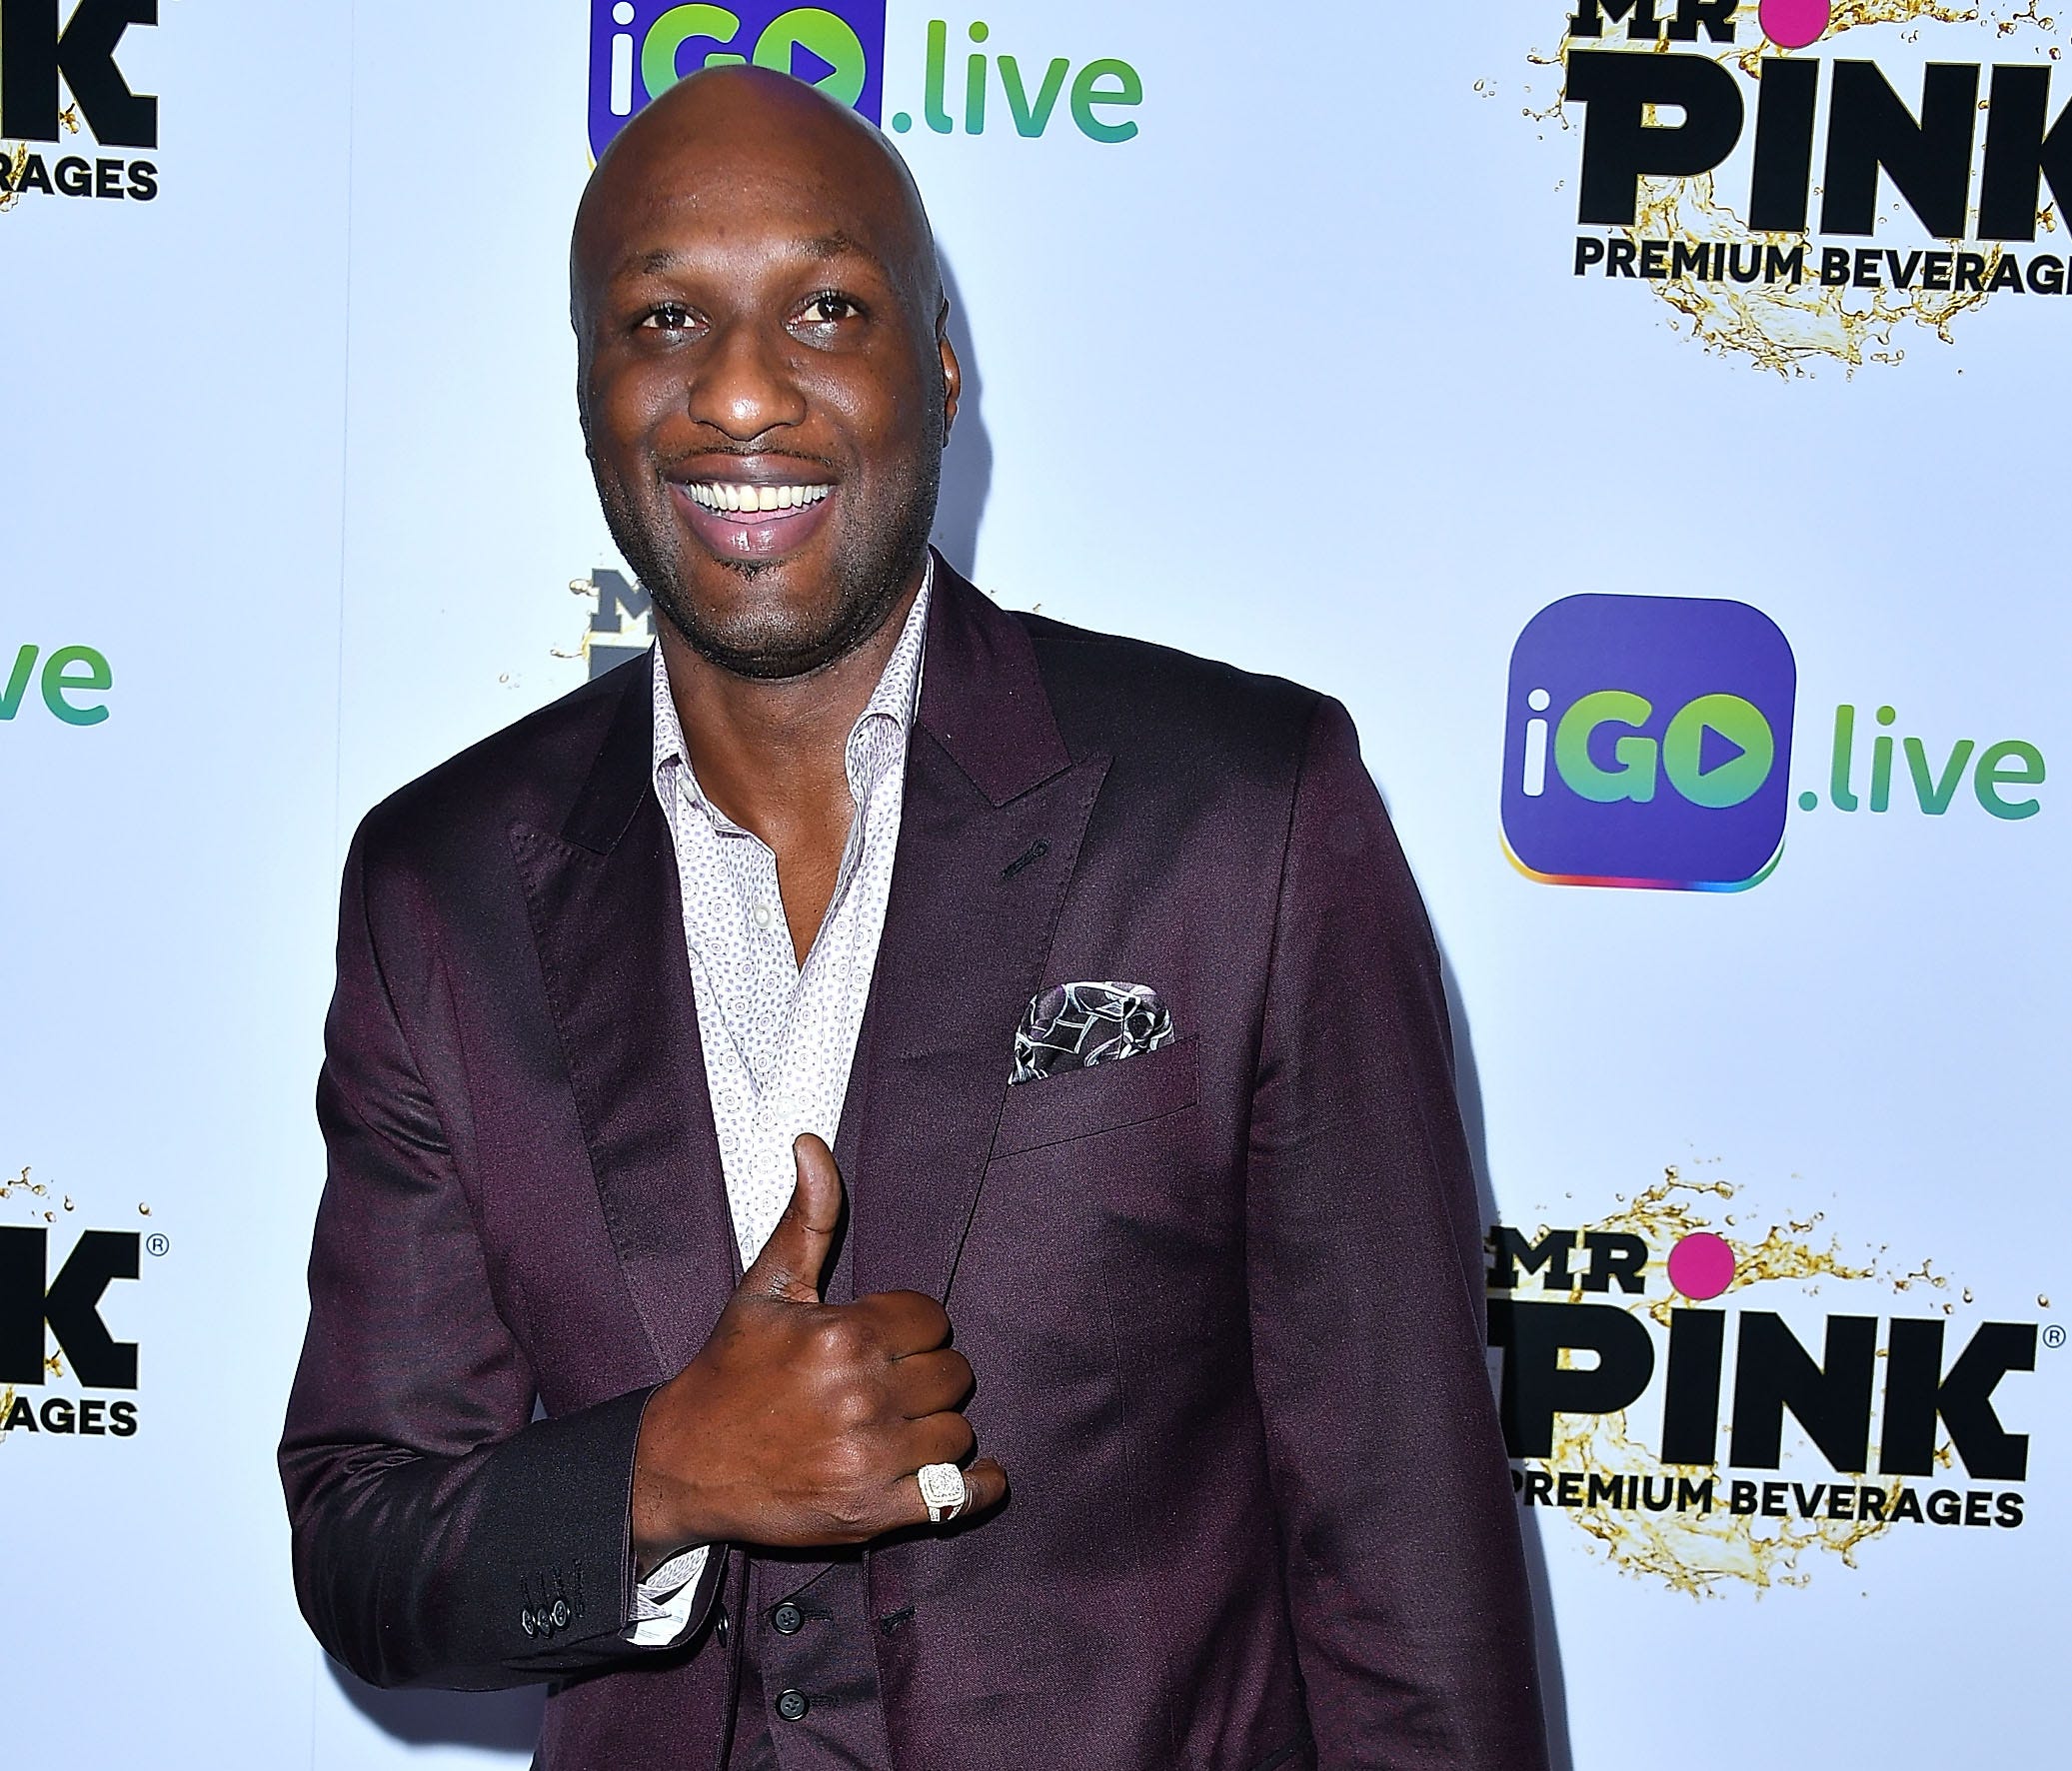 Lamar Odom checked out an event in Beverly Hills, California.